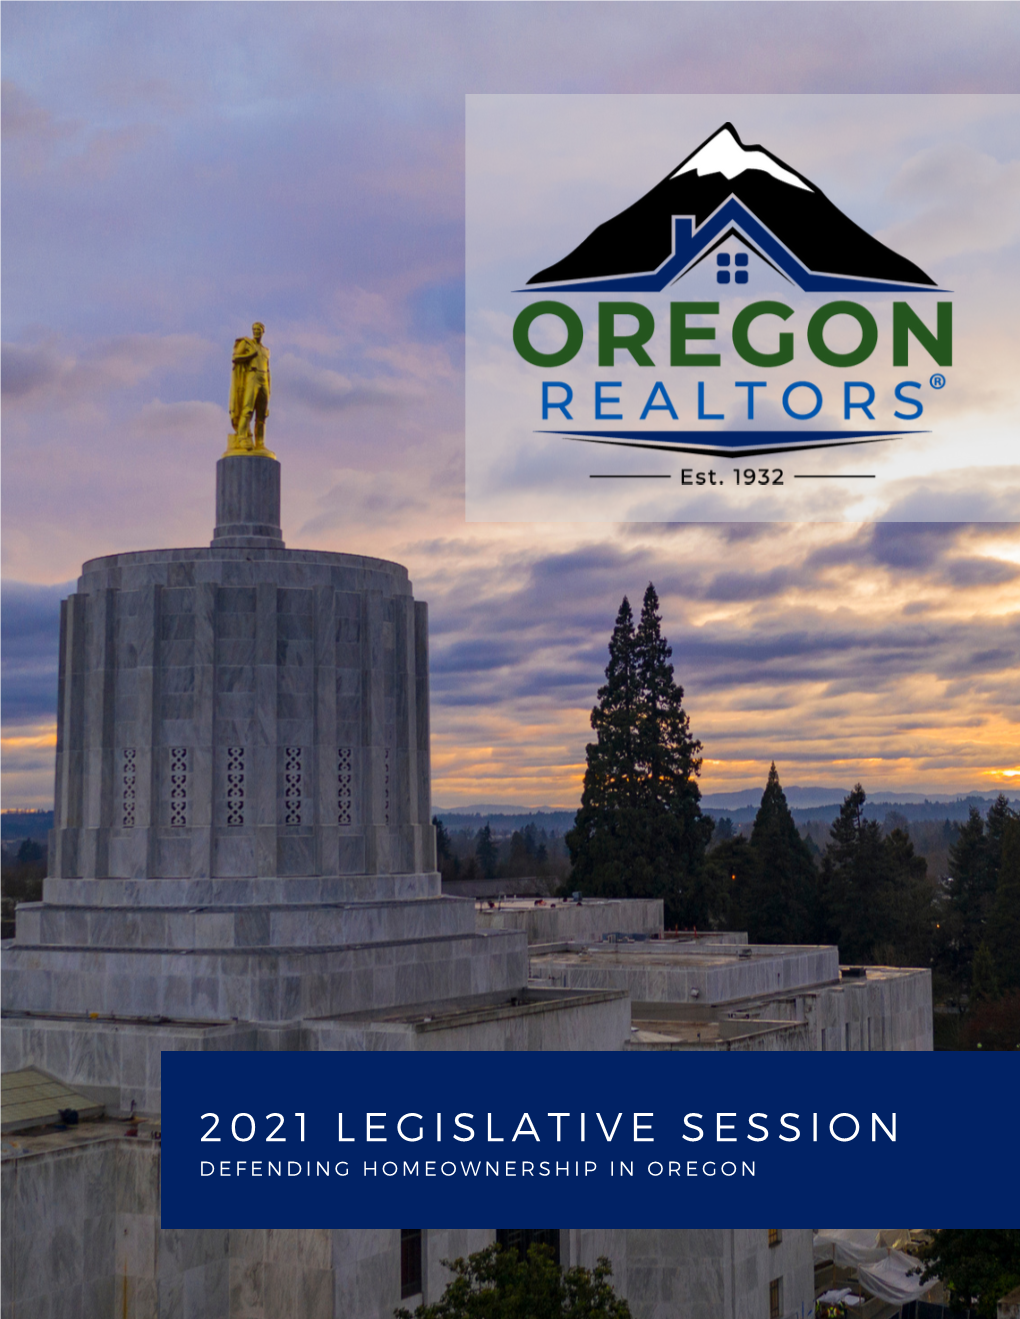 2021 Legislative Session the Legislature Passed This Bill with REALTORS® Support, Which Makes RON Permanent in Certain Circumstances